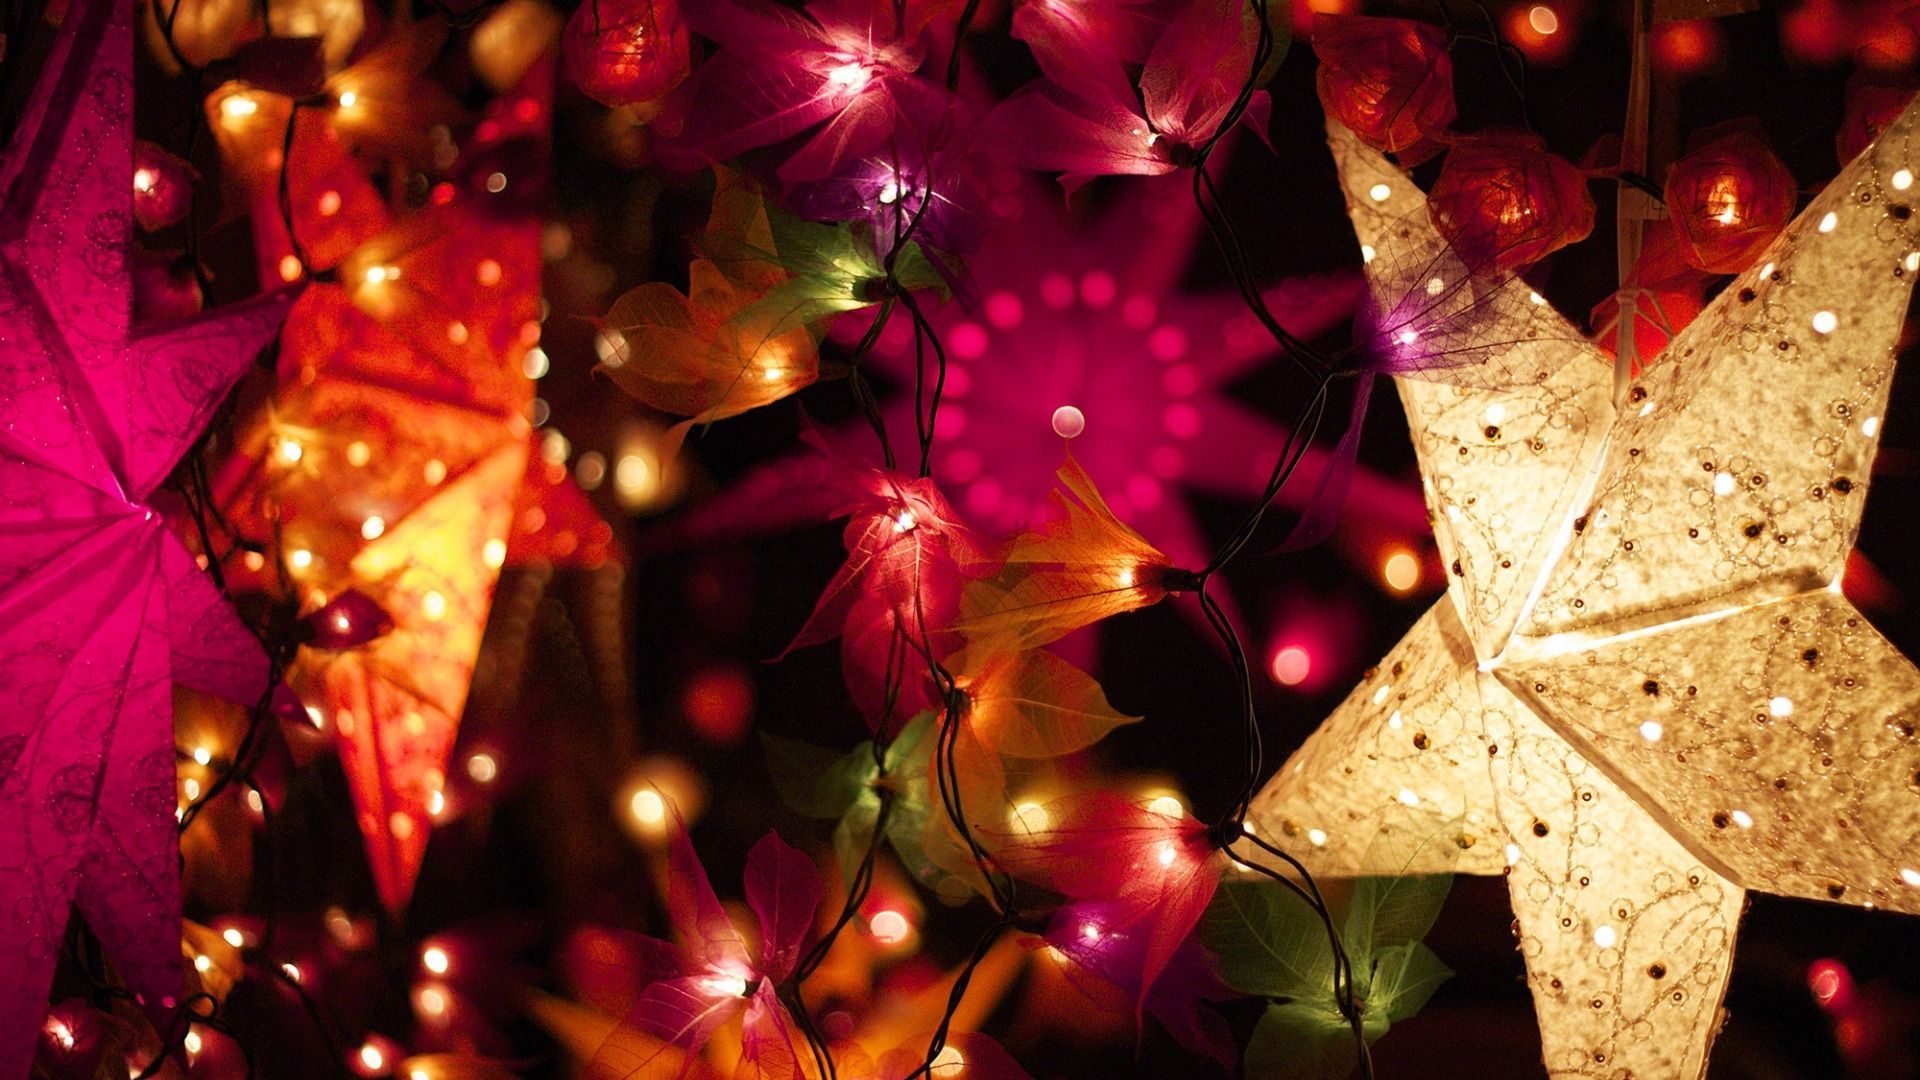 Colorful Star Lights Wallpapers - Wallpaper Cave